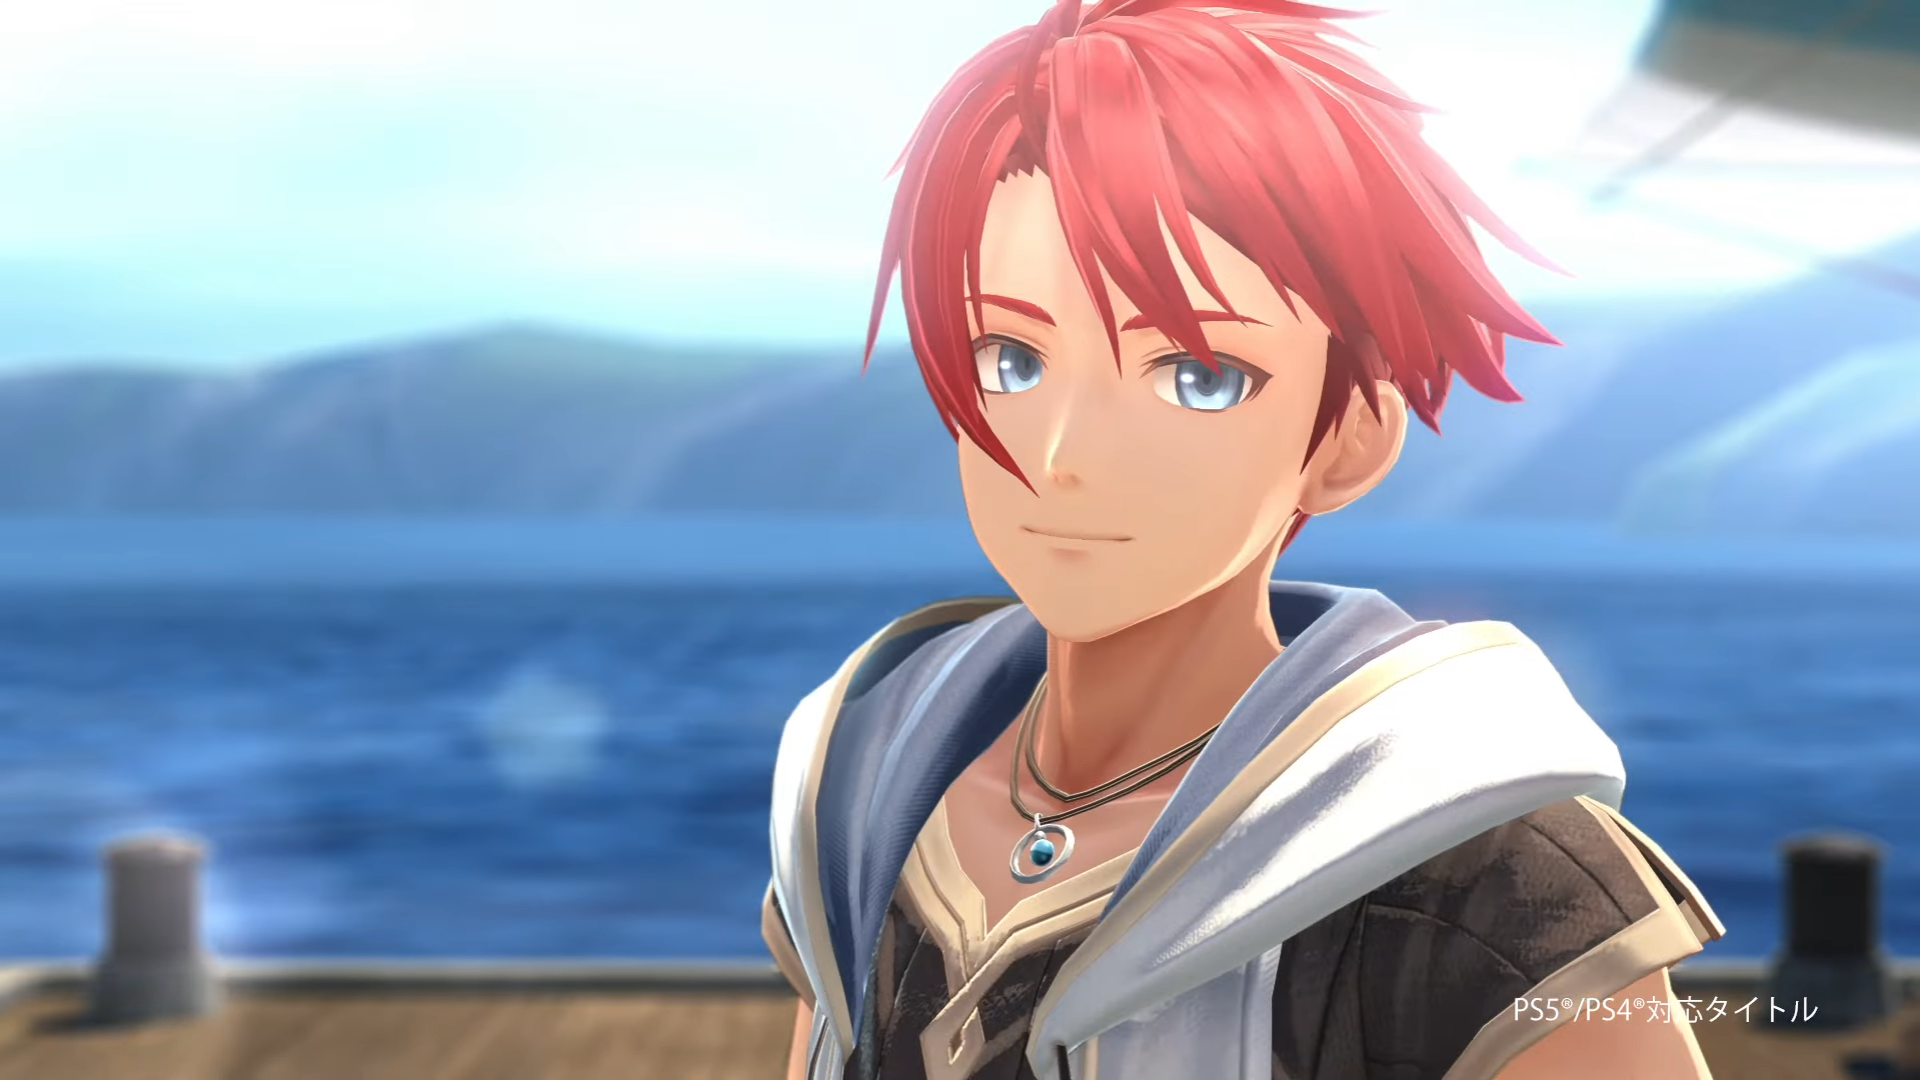 Sony Posts PlayStation “Sense of Play” Music Video Featuring Ys X Nordics, Fate/Samurai Remnant, Granblue Fantasy: Relink & More